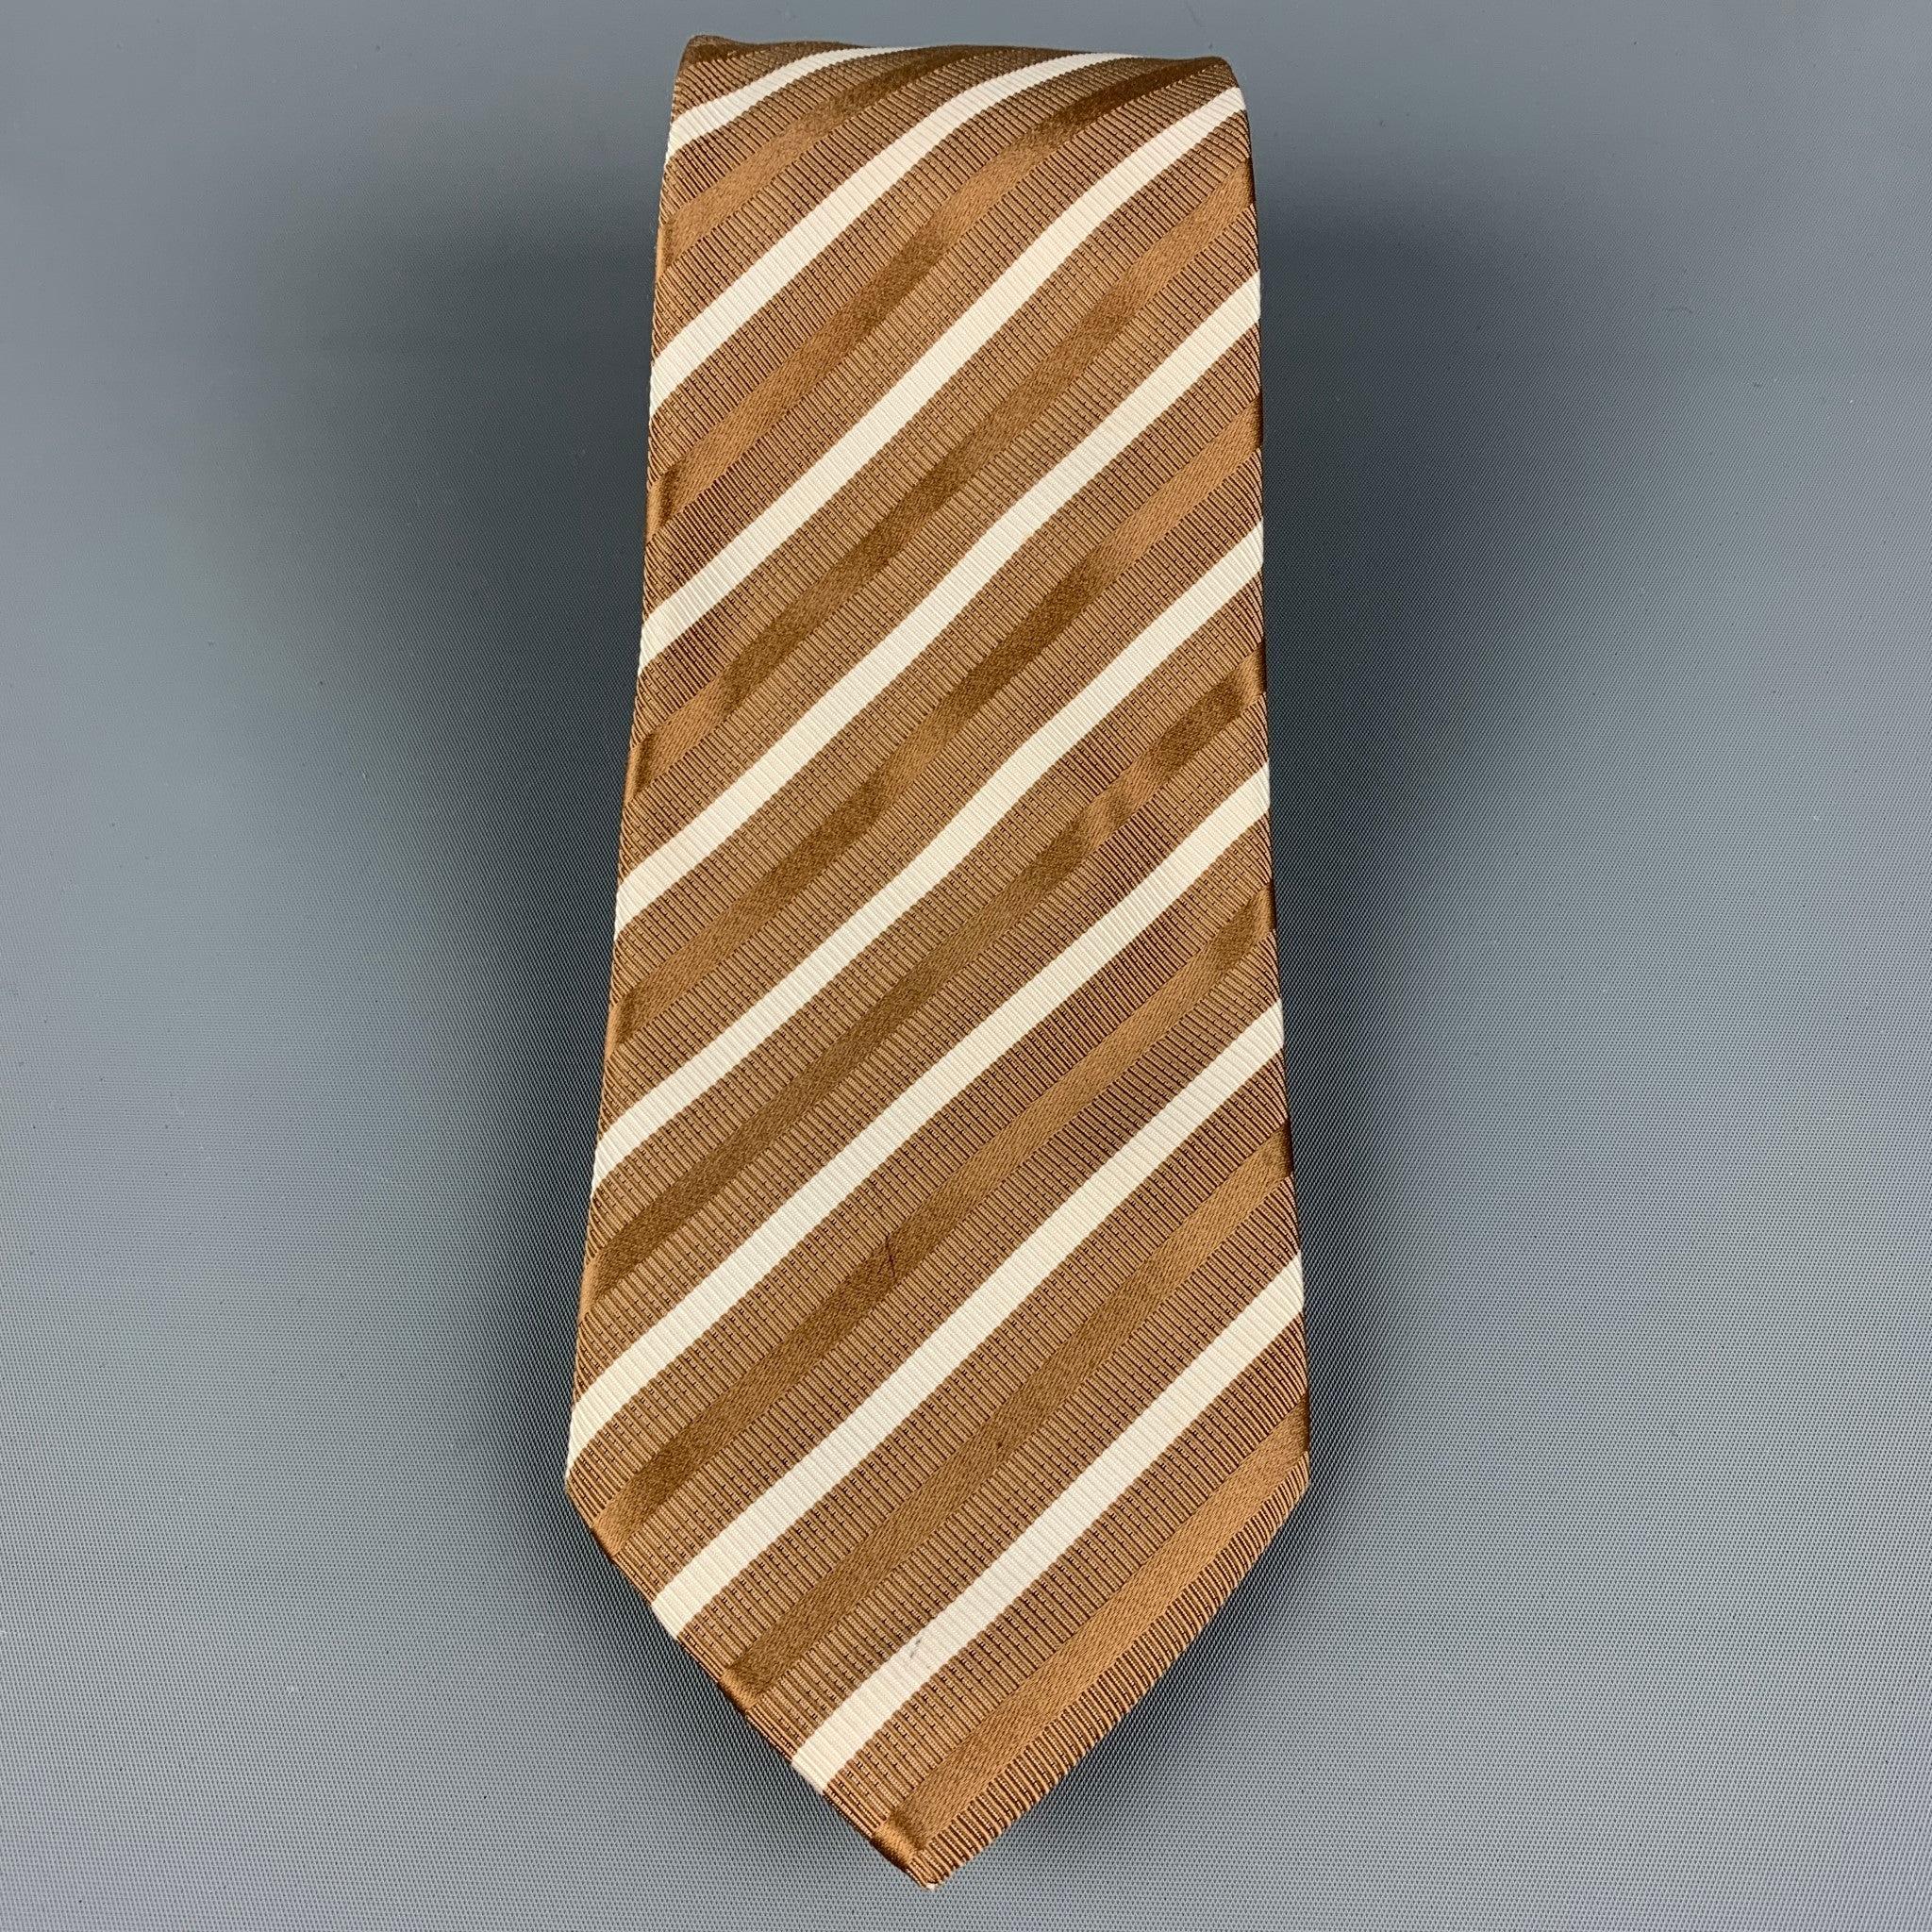 BRIONI
necktie comes in a taupe & white silk with a all over diagonal stripe print. Made in Italy. Very Good Pre-Owned Condition.Width: 3.75 inches  Length: 61 inches 
  
  
 
Reference: 120413
Category: Tie
More Details
    
Brand:  BRIONI
Gender: 